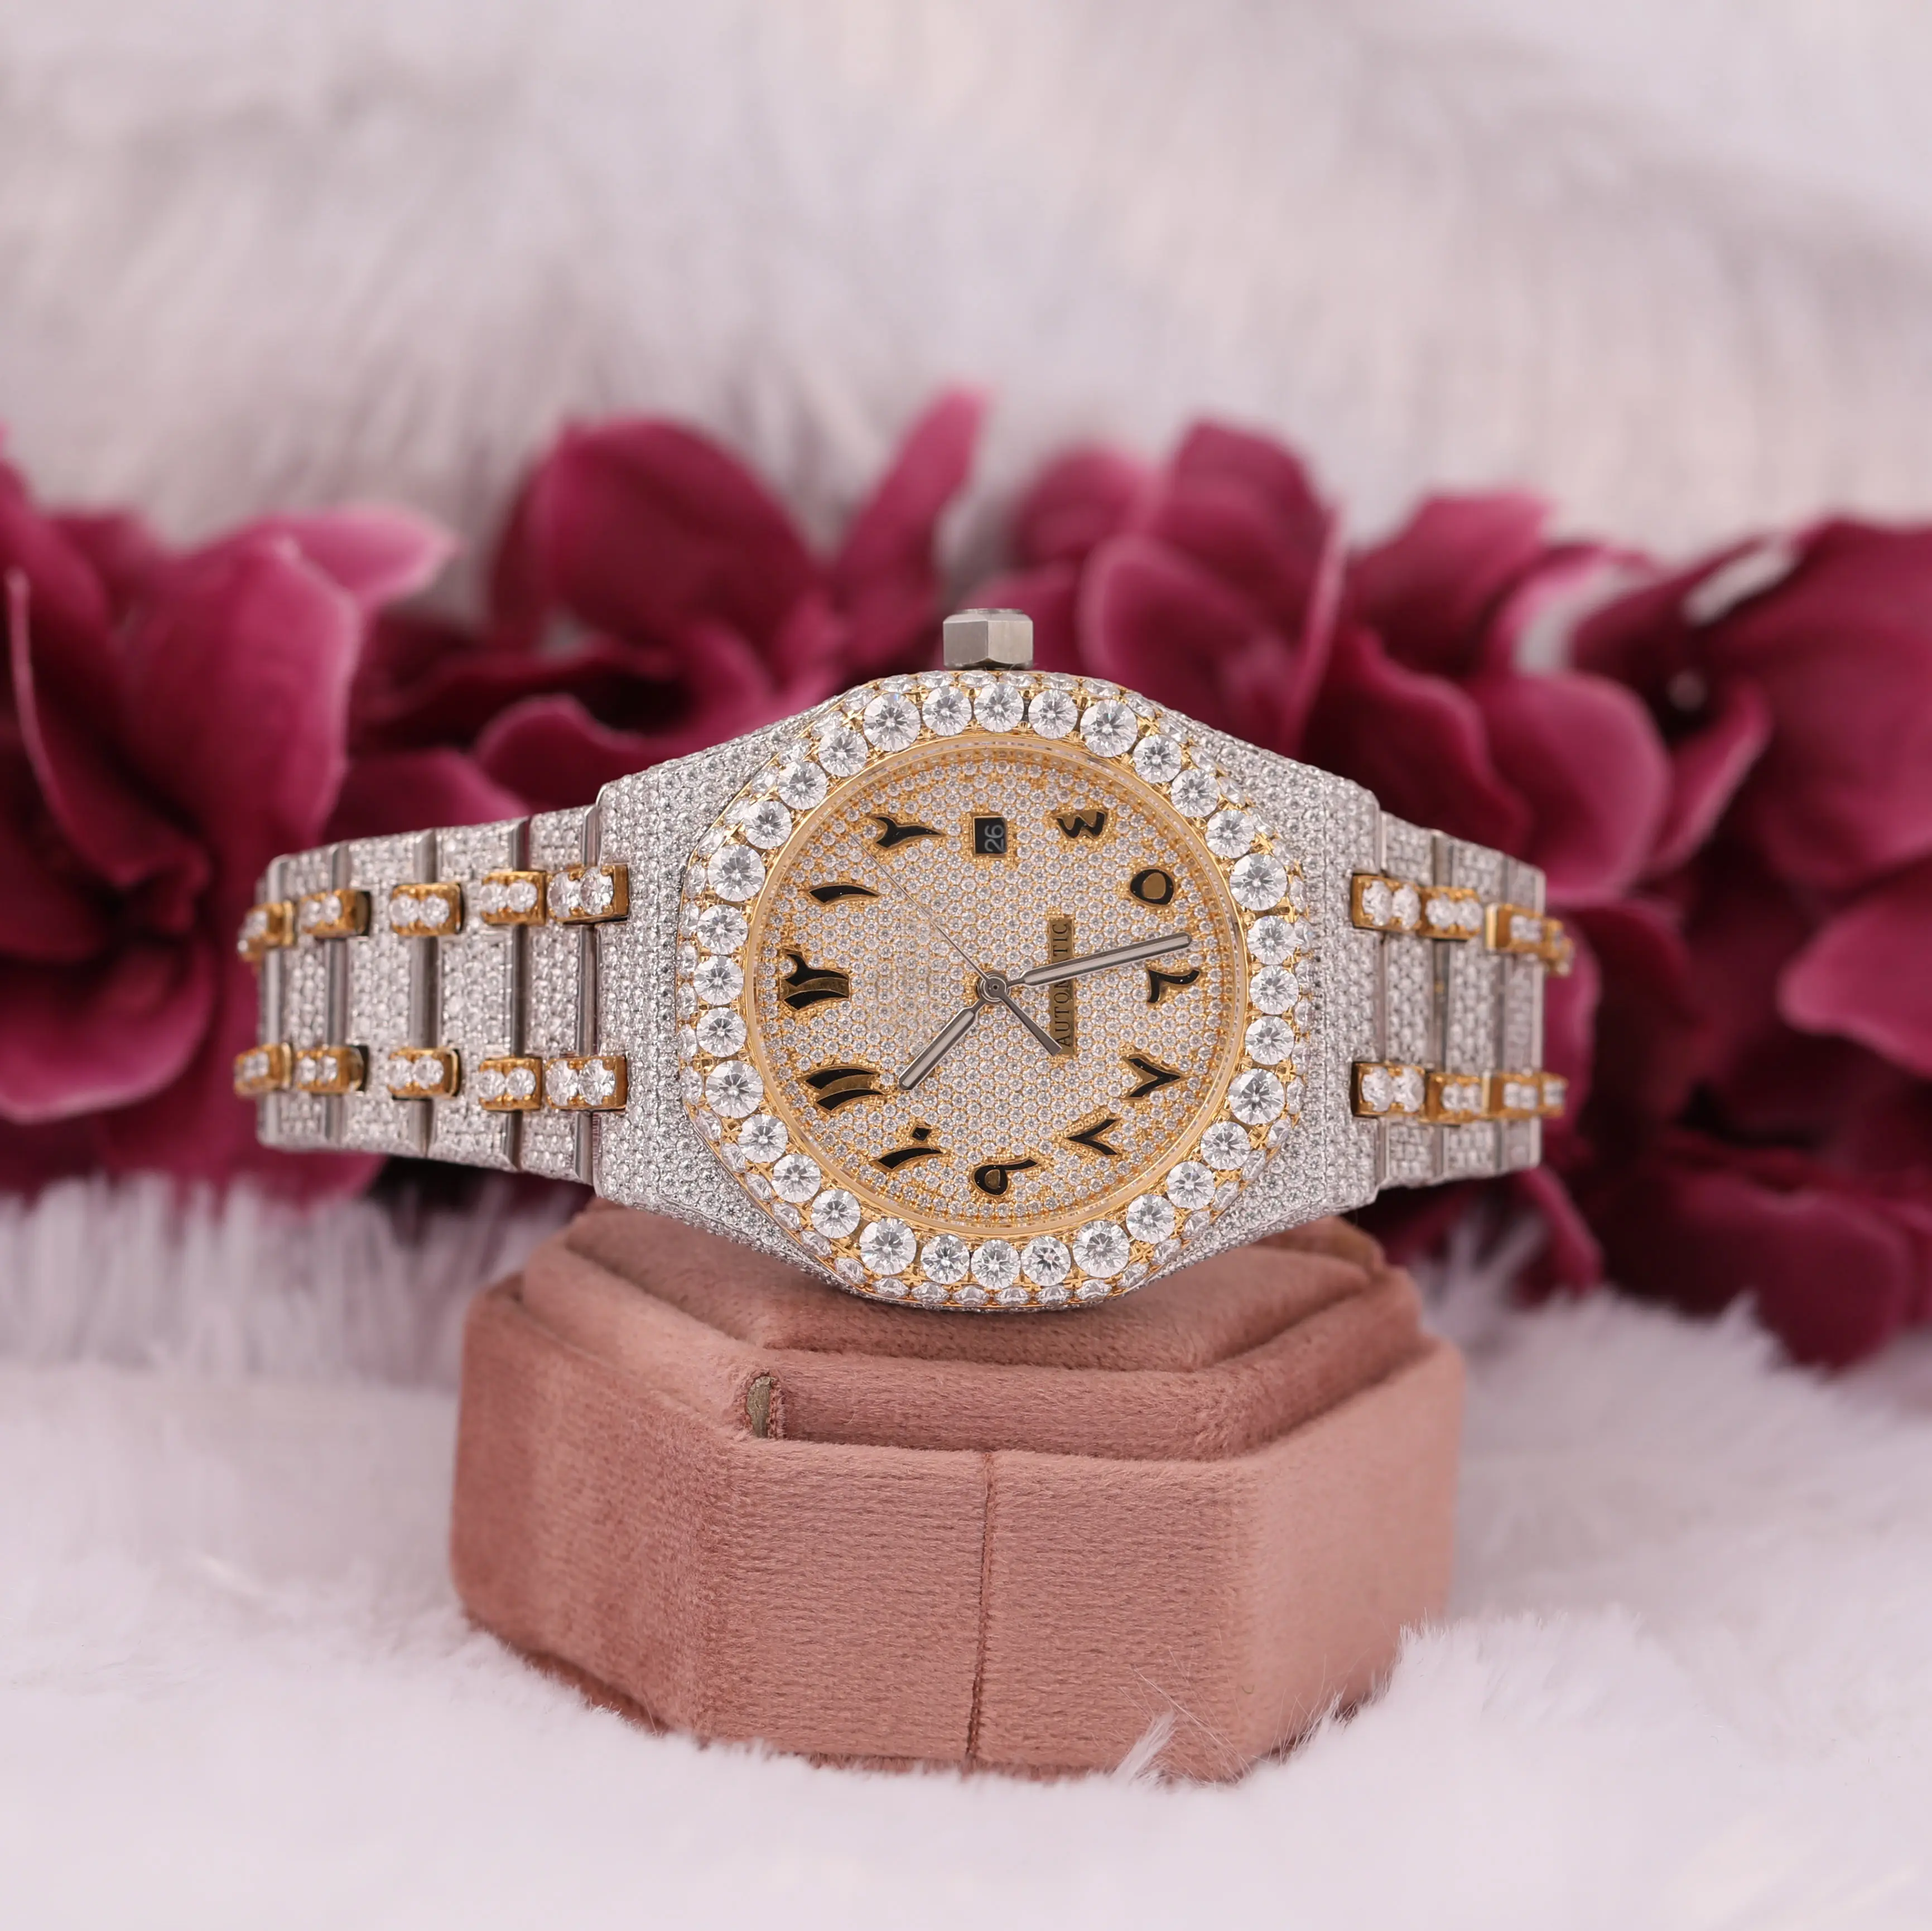 Elegant Stainless Steel DUAL TONE Round Moissanite Watch WITH ARABIC FULL Iced Out DIAMOND STUDDED - Japan Movement WATCH